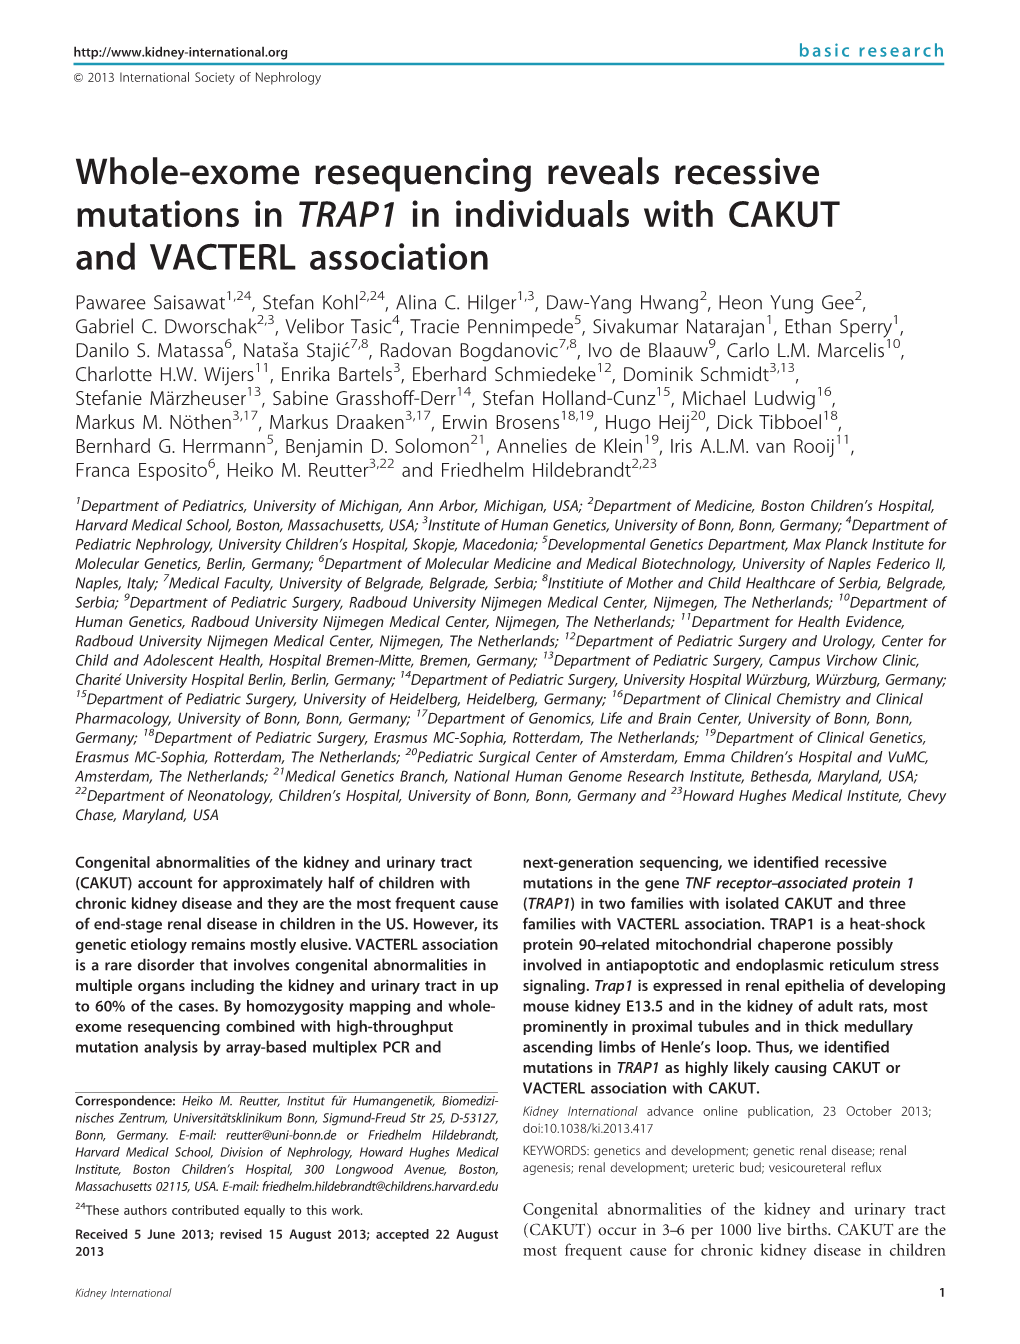 Whole-Exome Resequencing Reveals Recessive Mutations in TRAP1 in Individuals with CAKUT and VACTERL Association Pawaree Saisawat1,24, Stefan Kohl2,24, Alina C